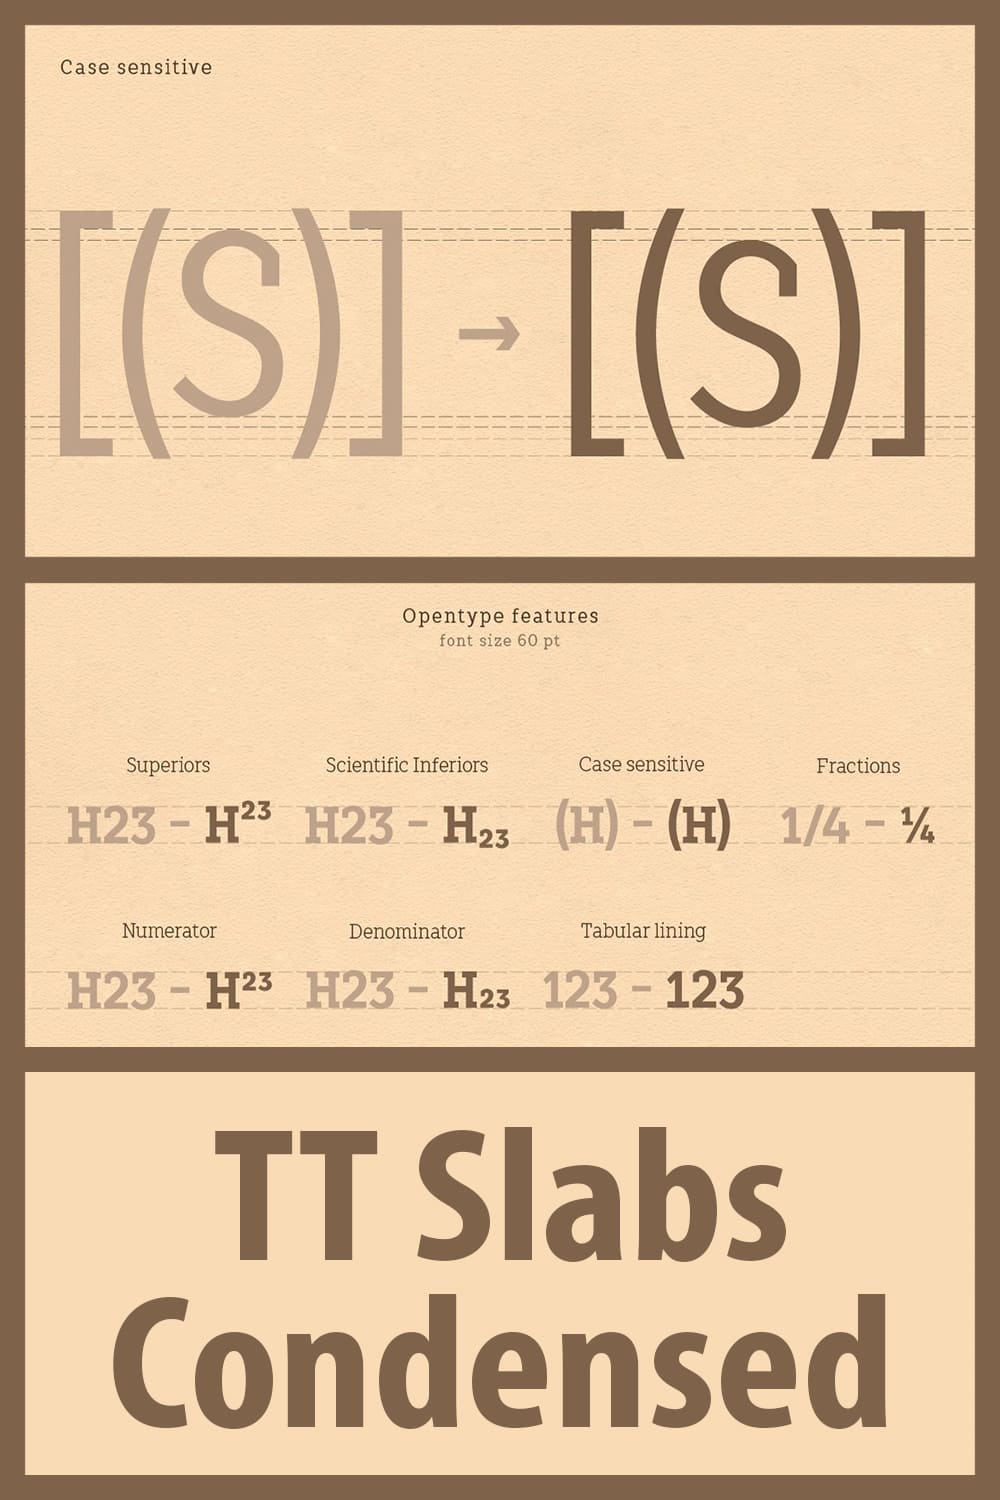 Beige font and brown font.